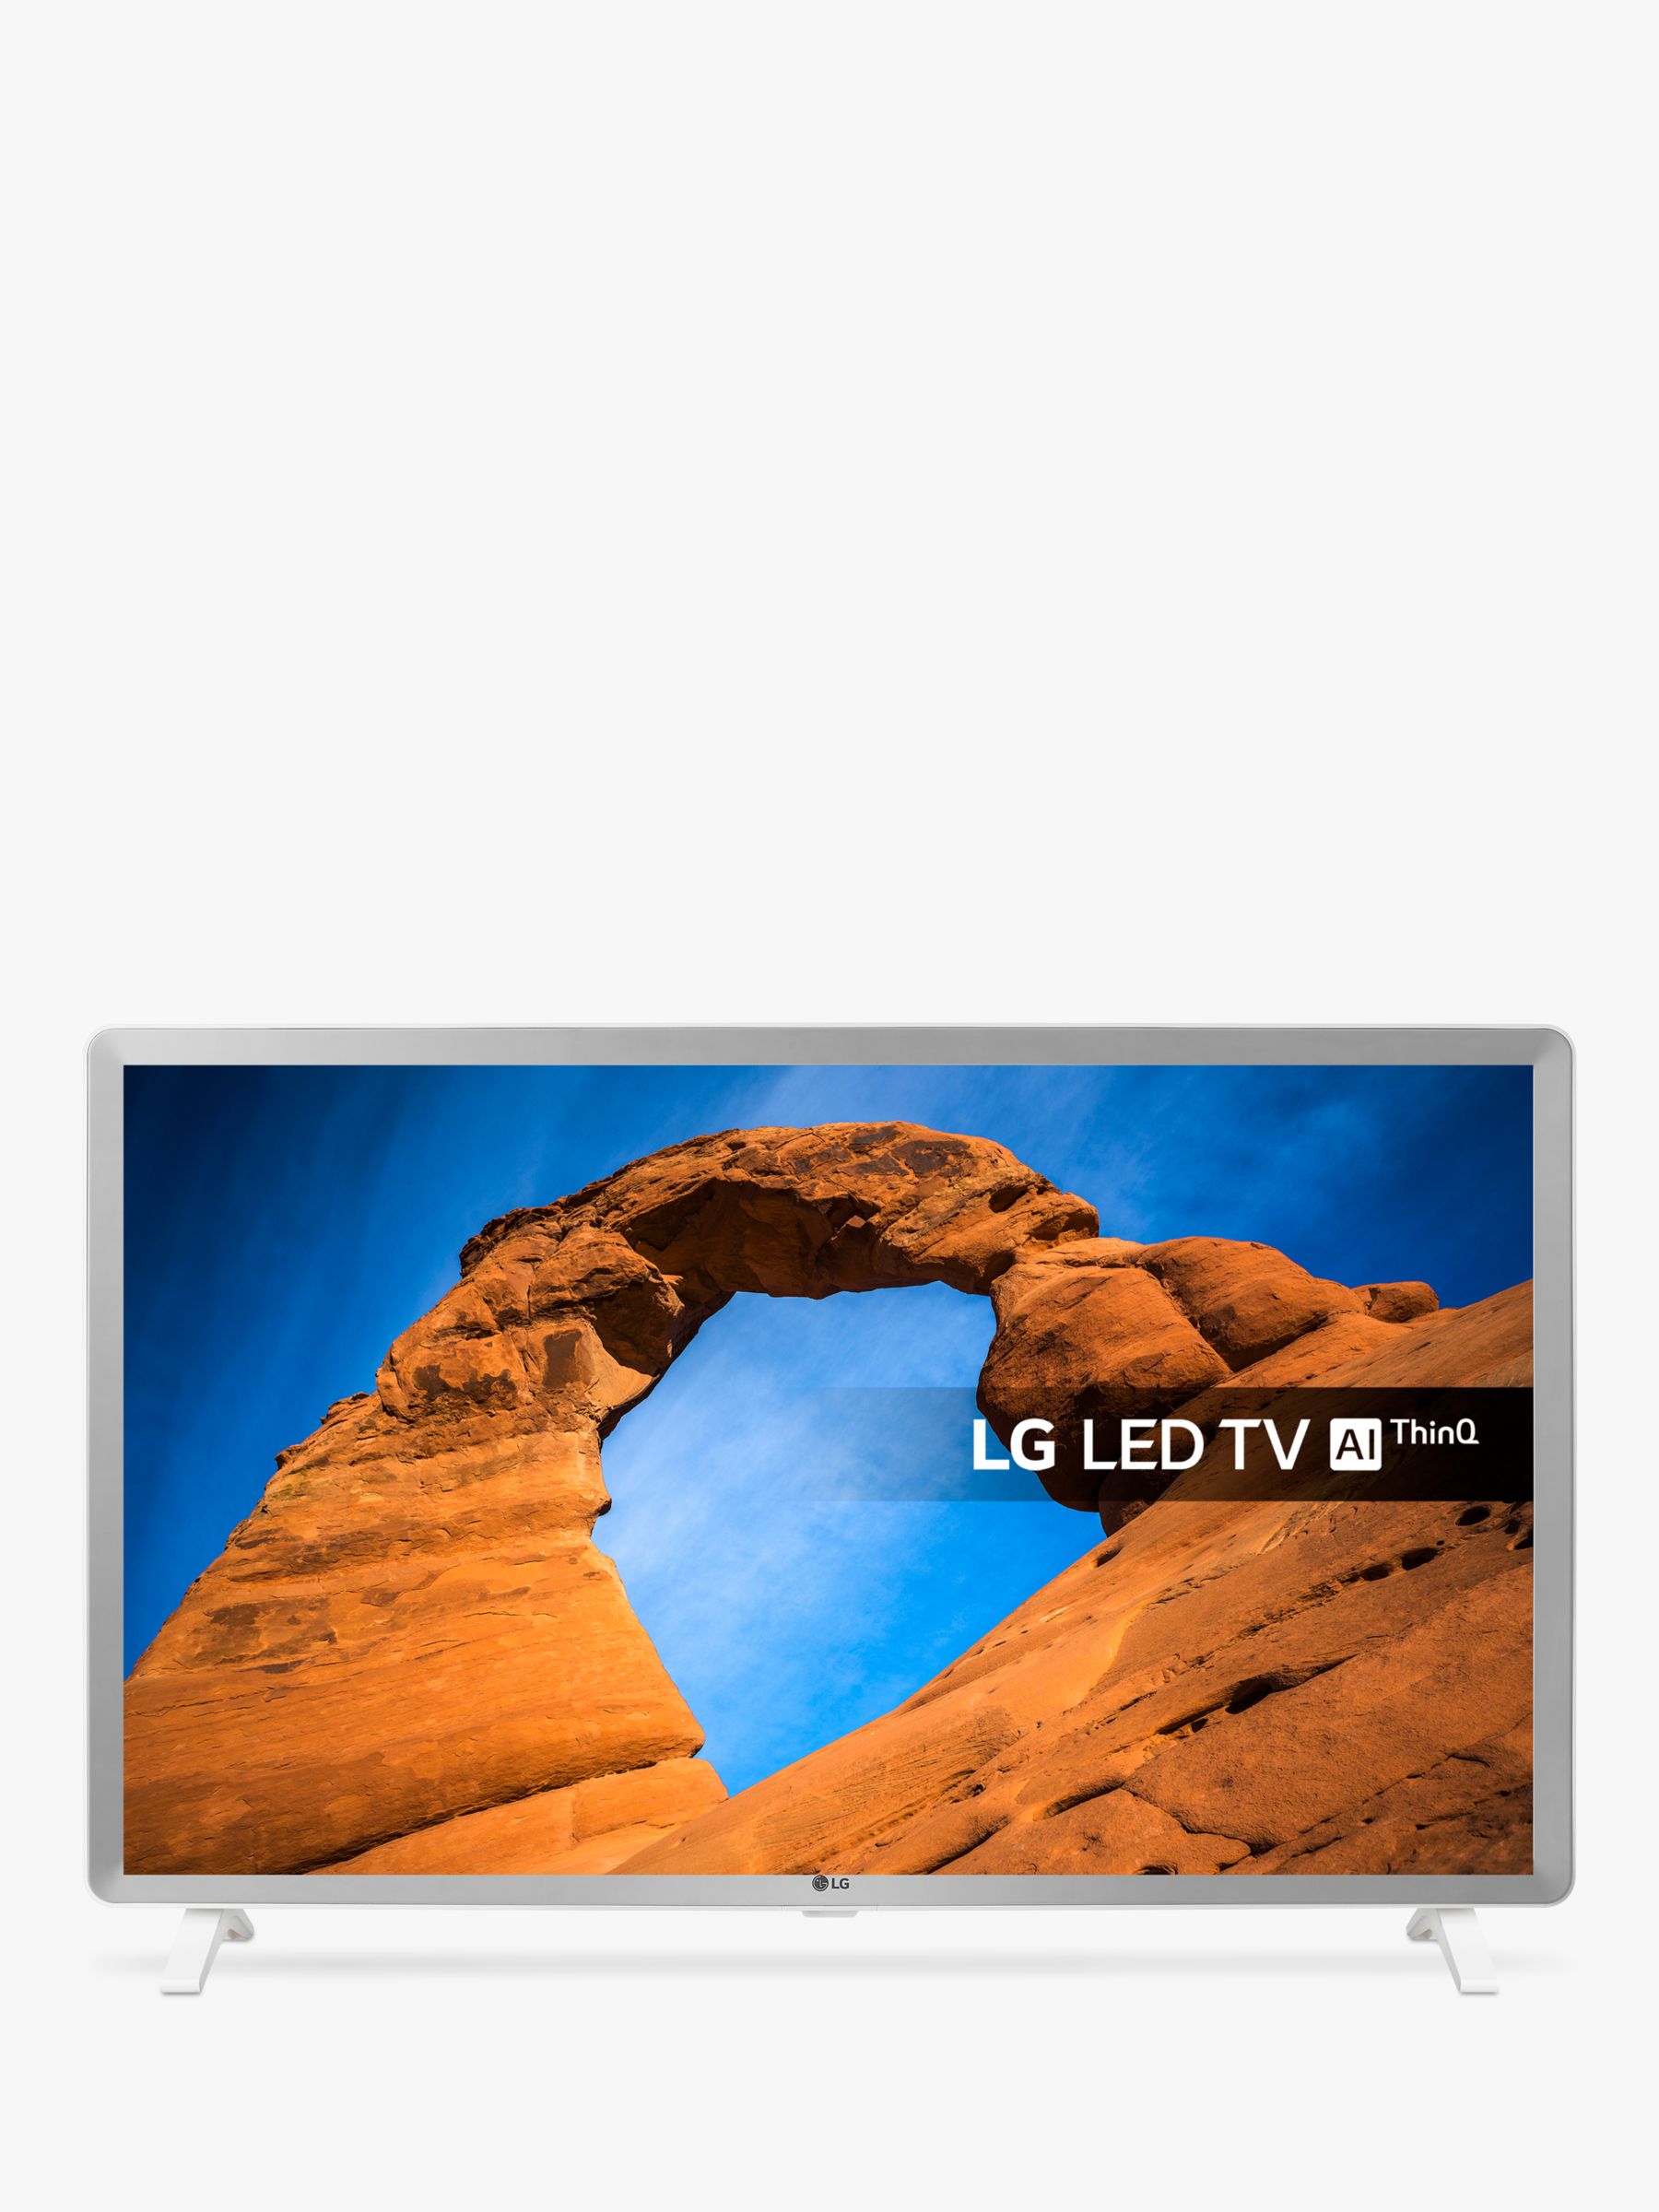 LG 32LK6200PLA LED HDR Full HD 1080p Smart TV, 32" with Freeview Play/Freesat HD, White & Grey